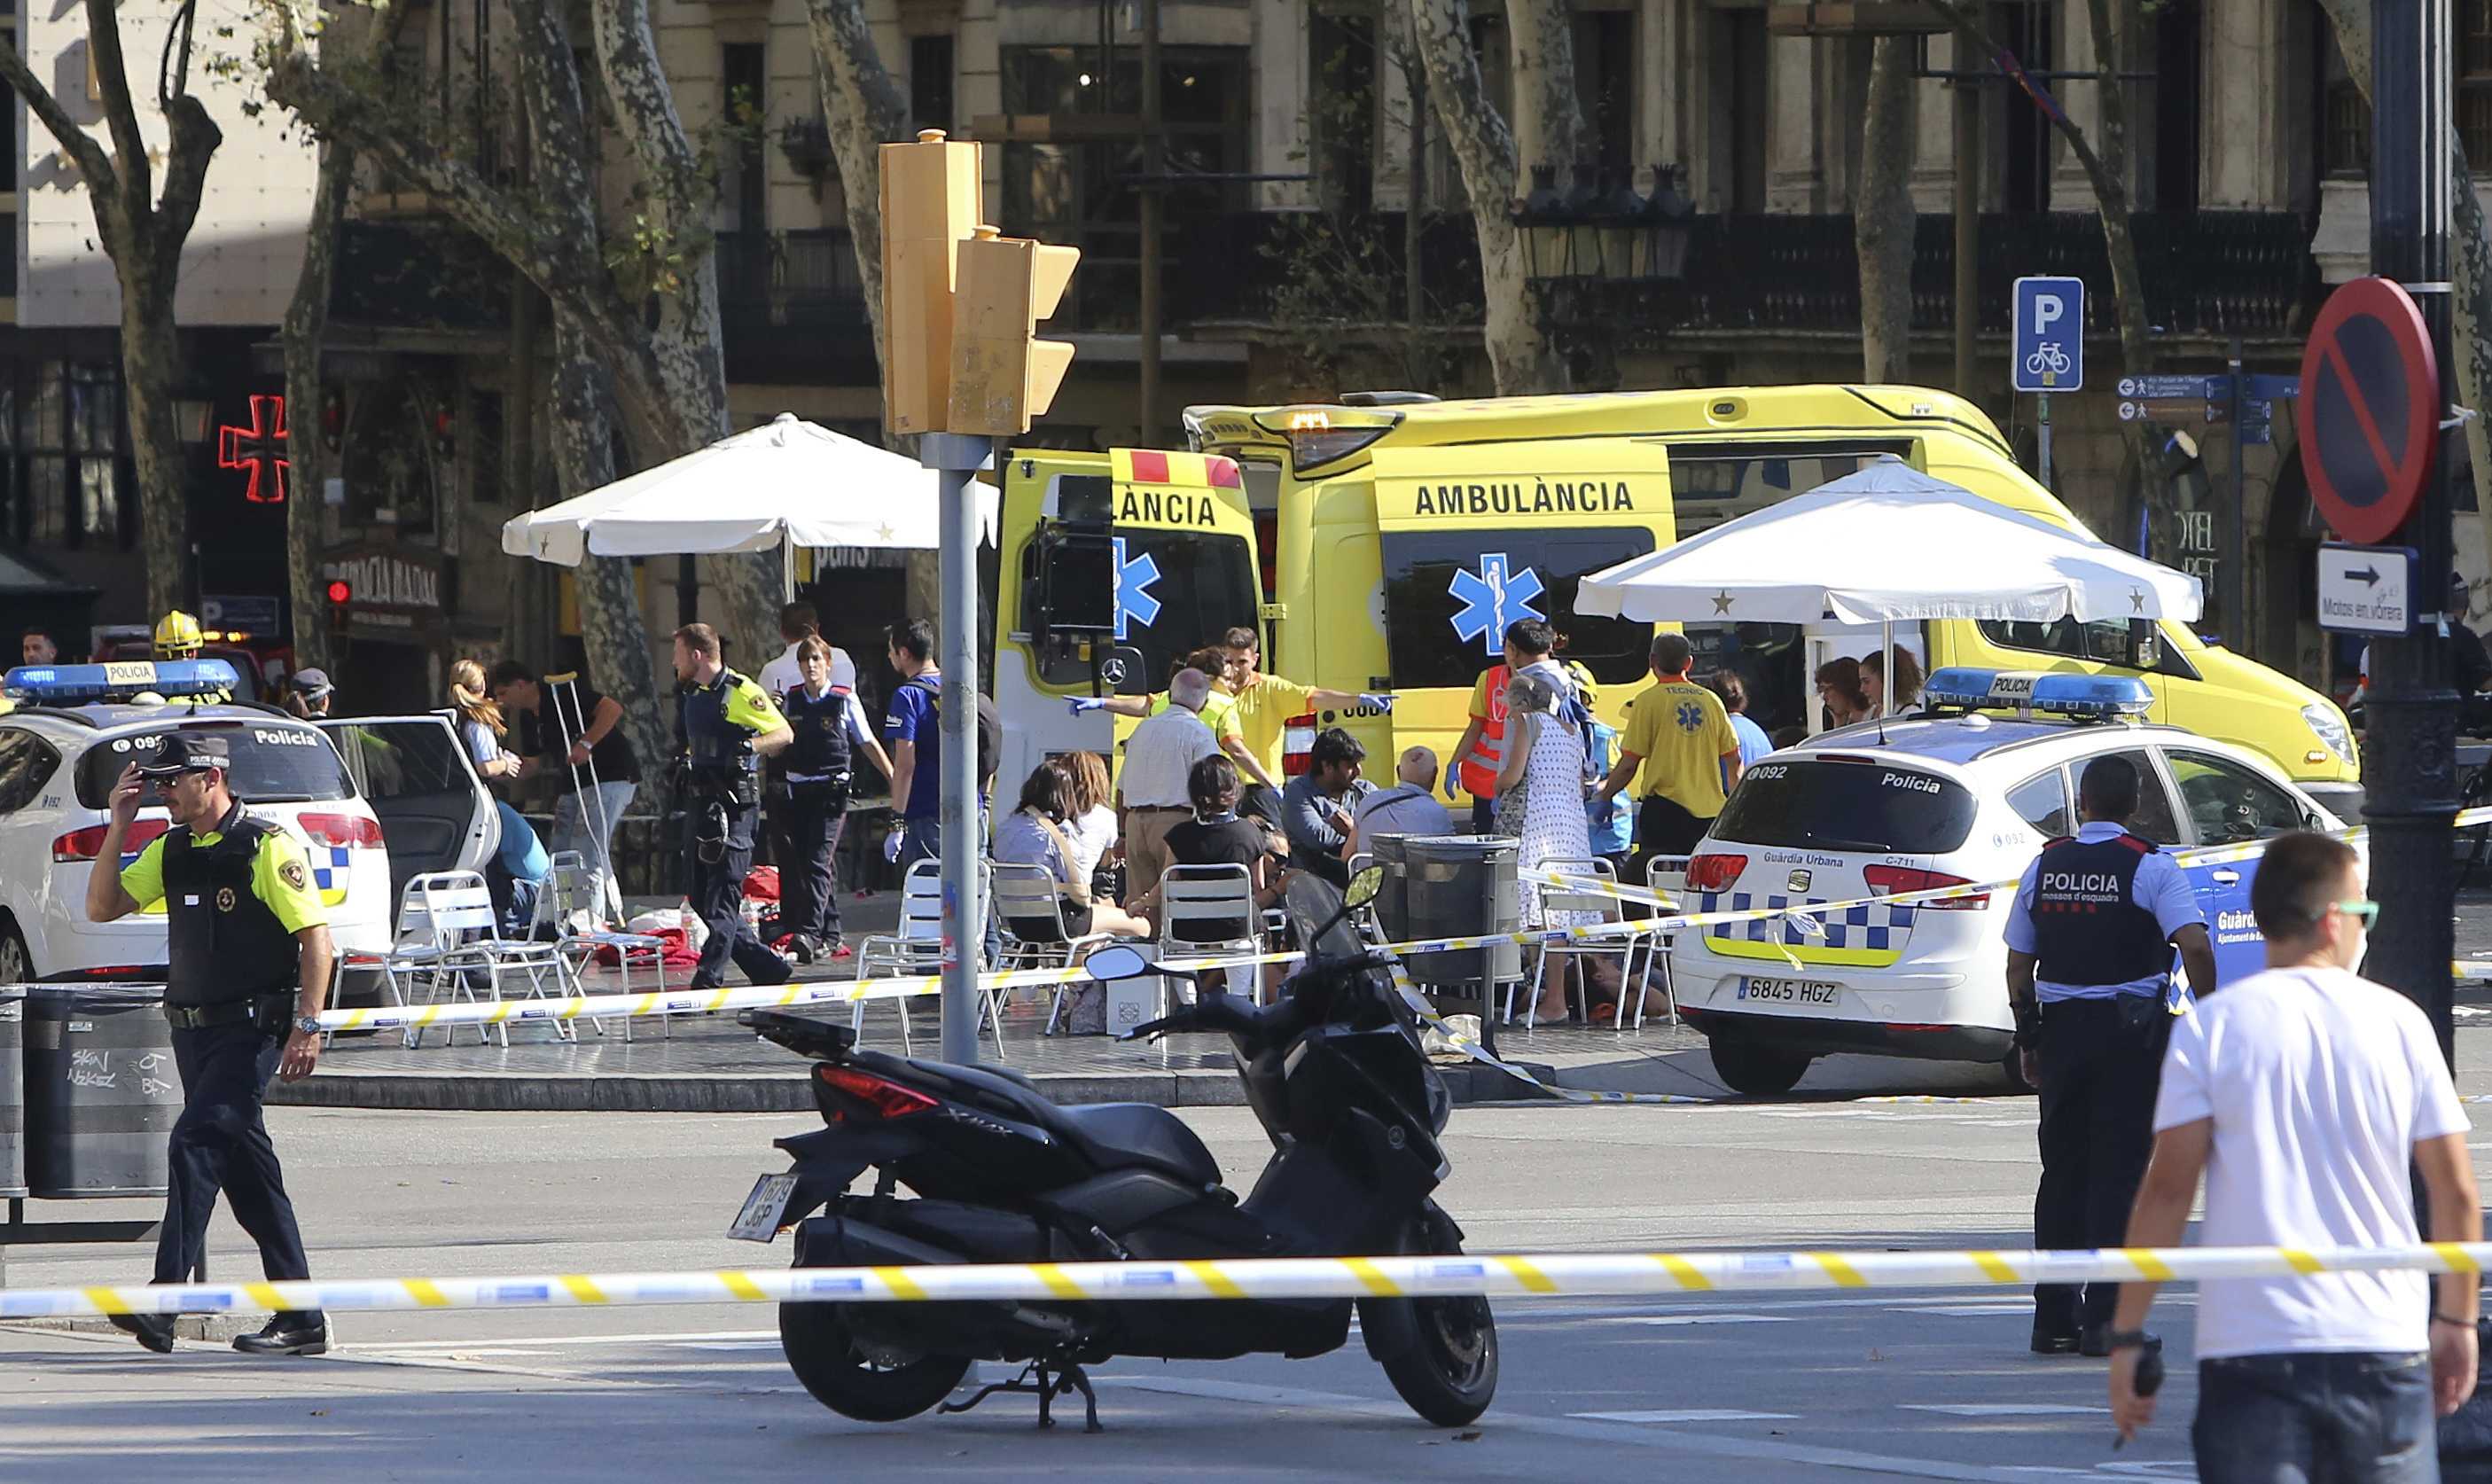 7-year-old confirmed dead after Barcelona attack